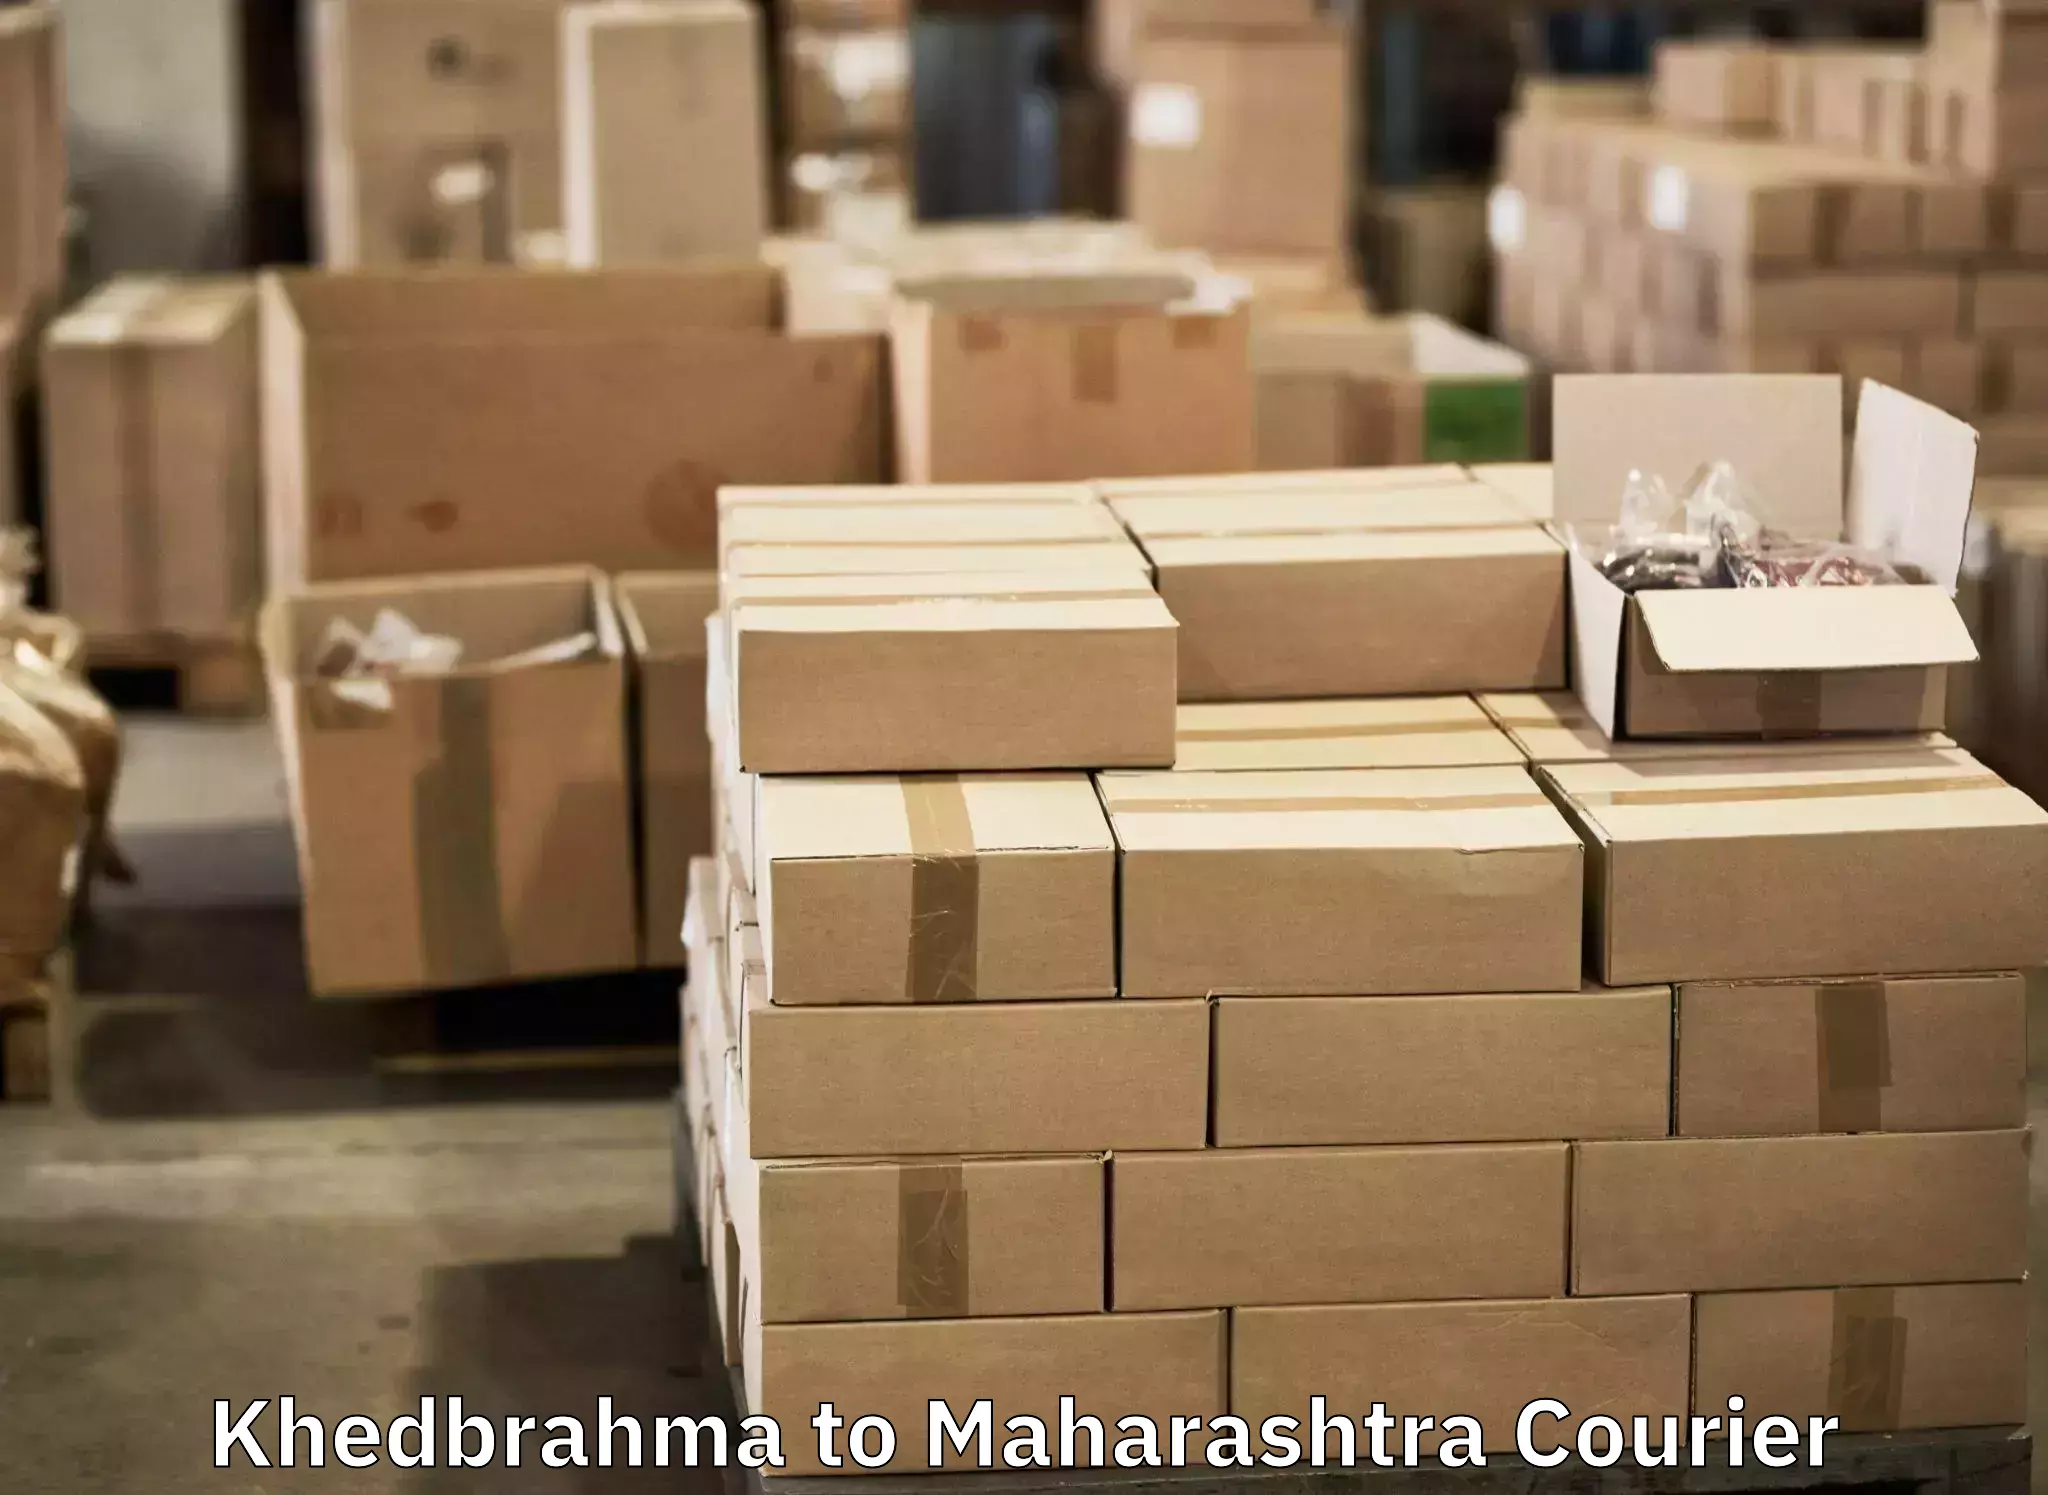 Baggage shipping logistics in Khedbrahma to Alephata